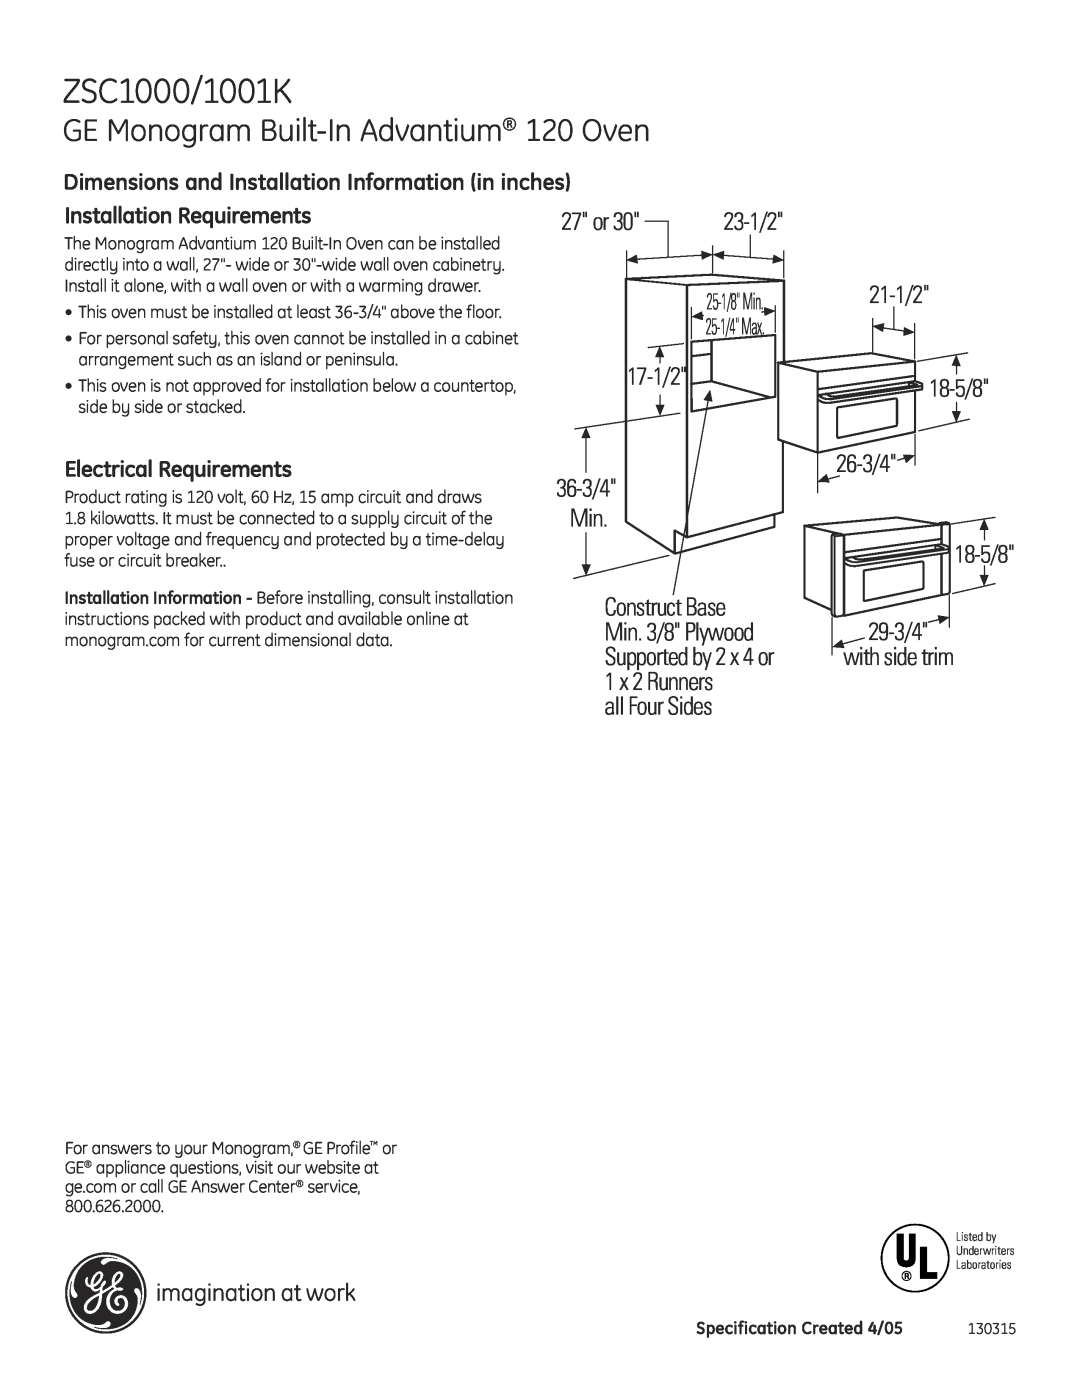 GE ZSC1000/1001K dimensions GE Monogram Built-InAdvantium 120 Oven, Dimensions and Installation Information in inches 